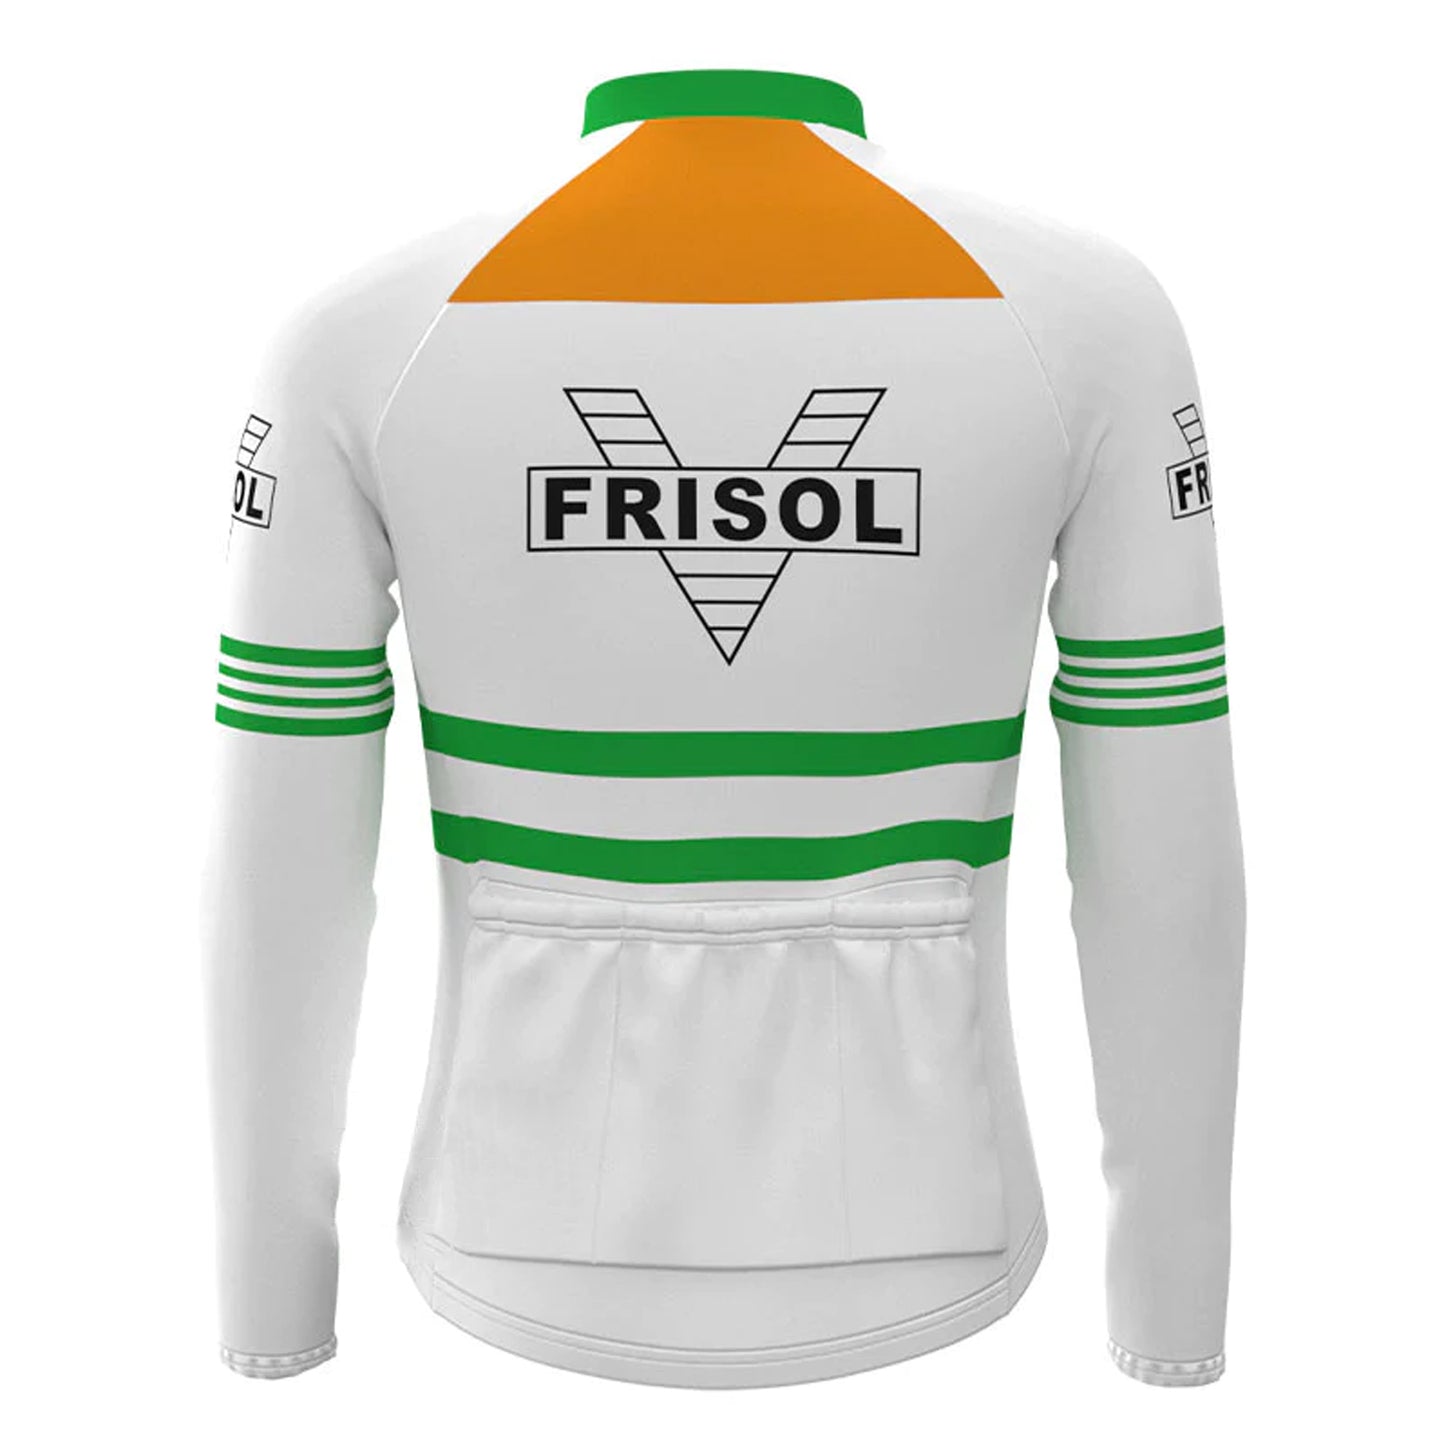 Frisol Green White Long Sleeve Vintage Cycling Jersey Top